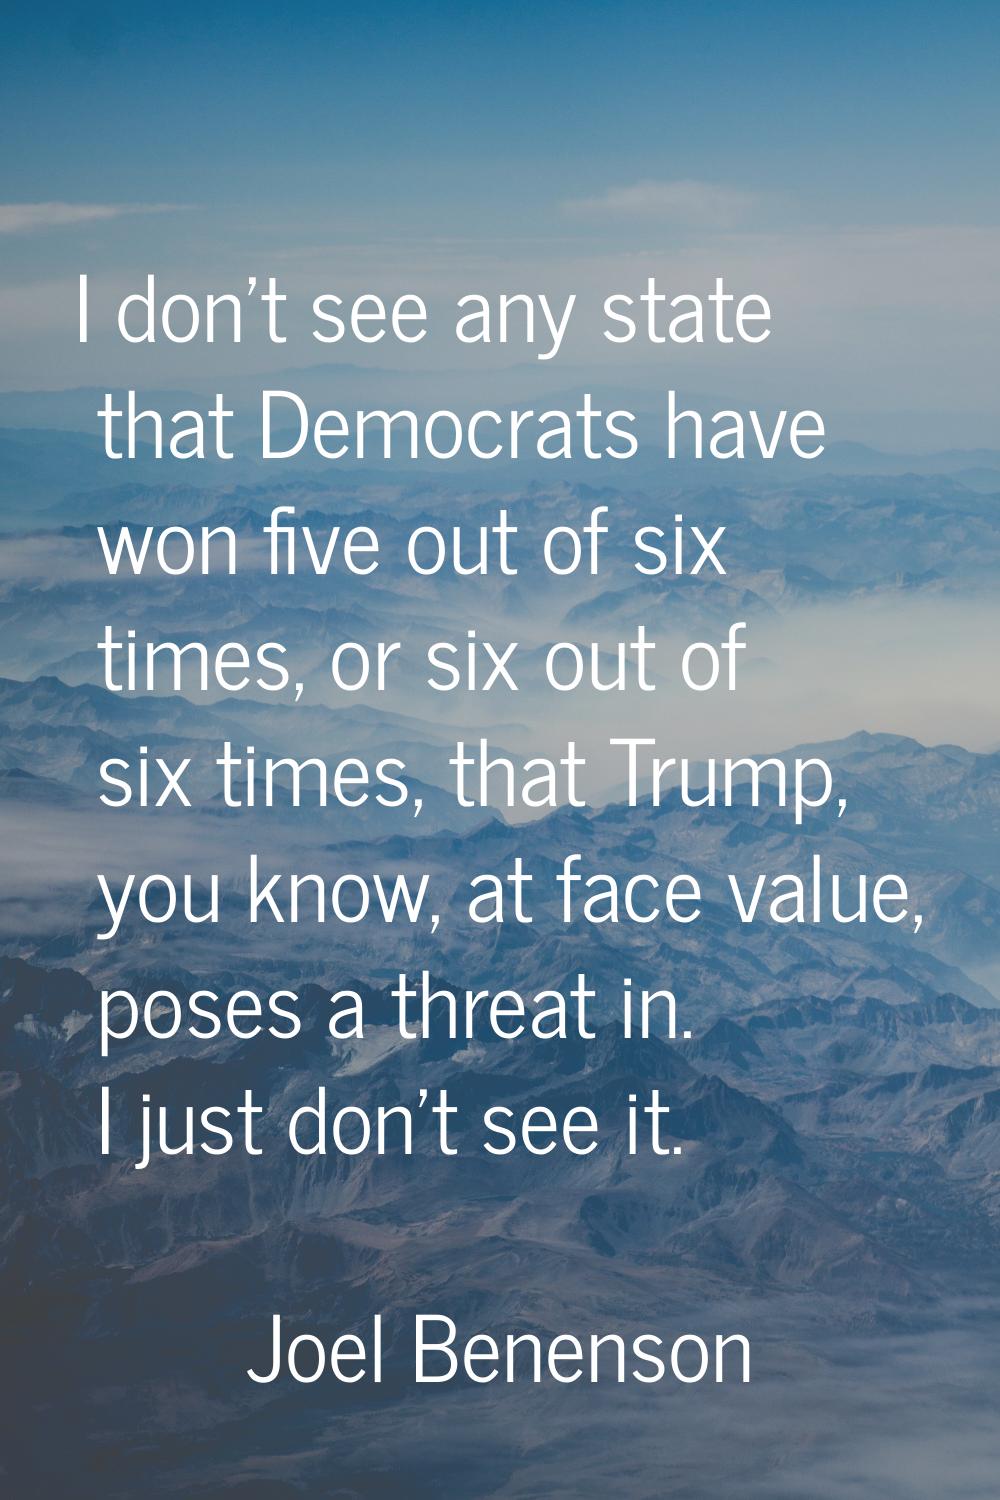 I don't see any state that Democrats have won five out of six times, or six out of six times, that 